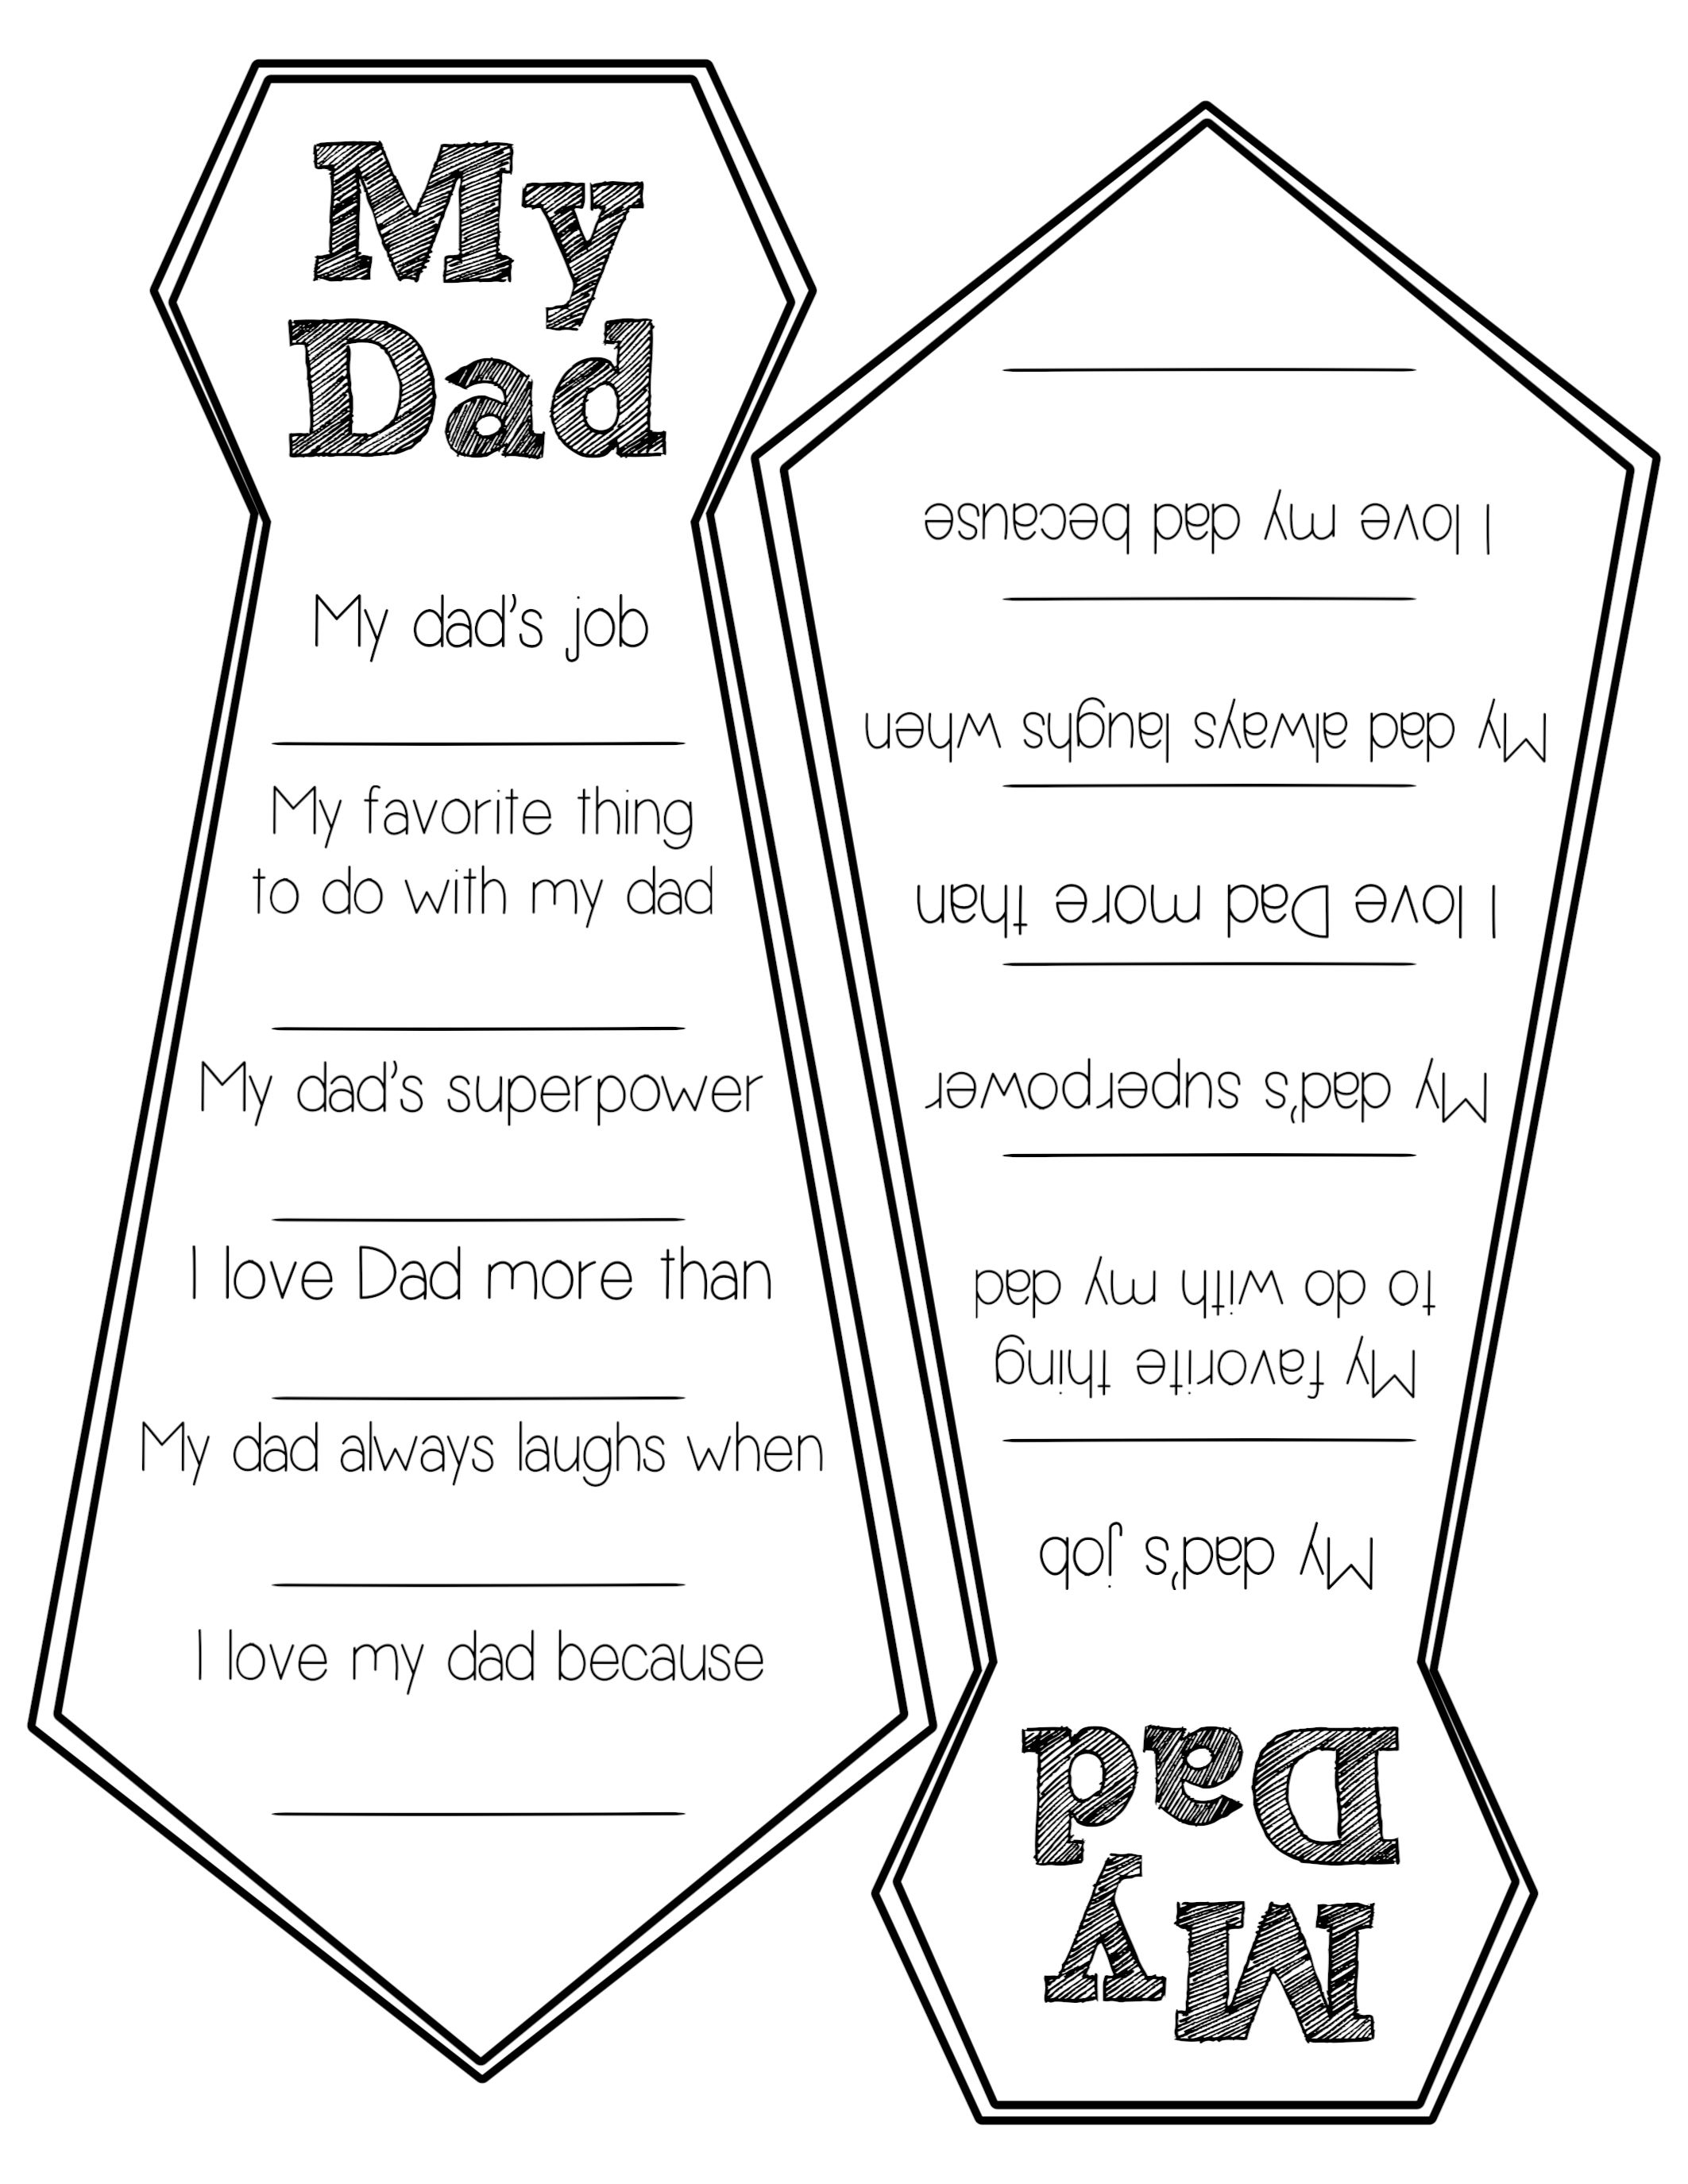 Father&amp;#039;s Day Free Printable Cards. Diy Father&amp;#039;s Day Fill In Cards - Free Printable Father&amp;#039;s Day Card From Wife To Husband